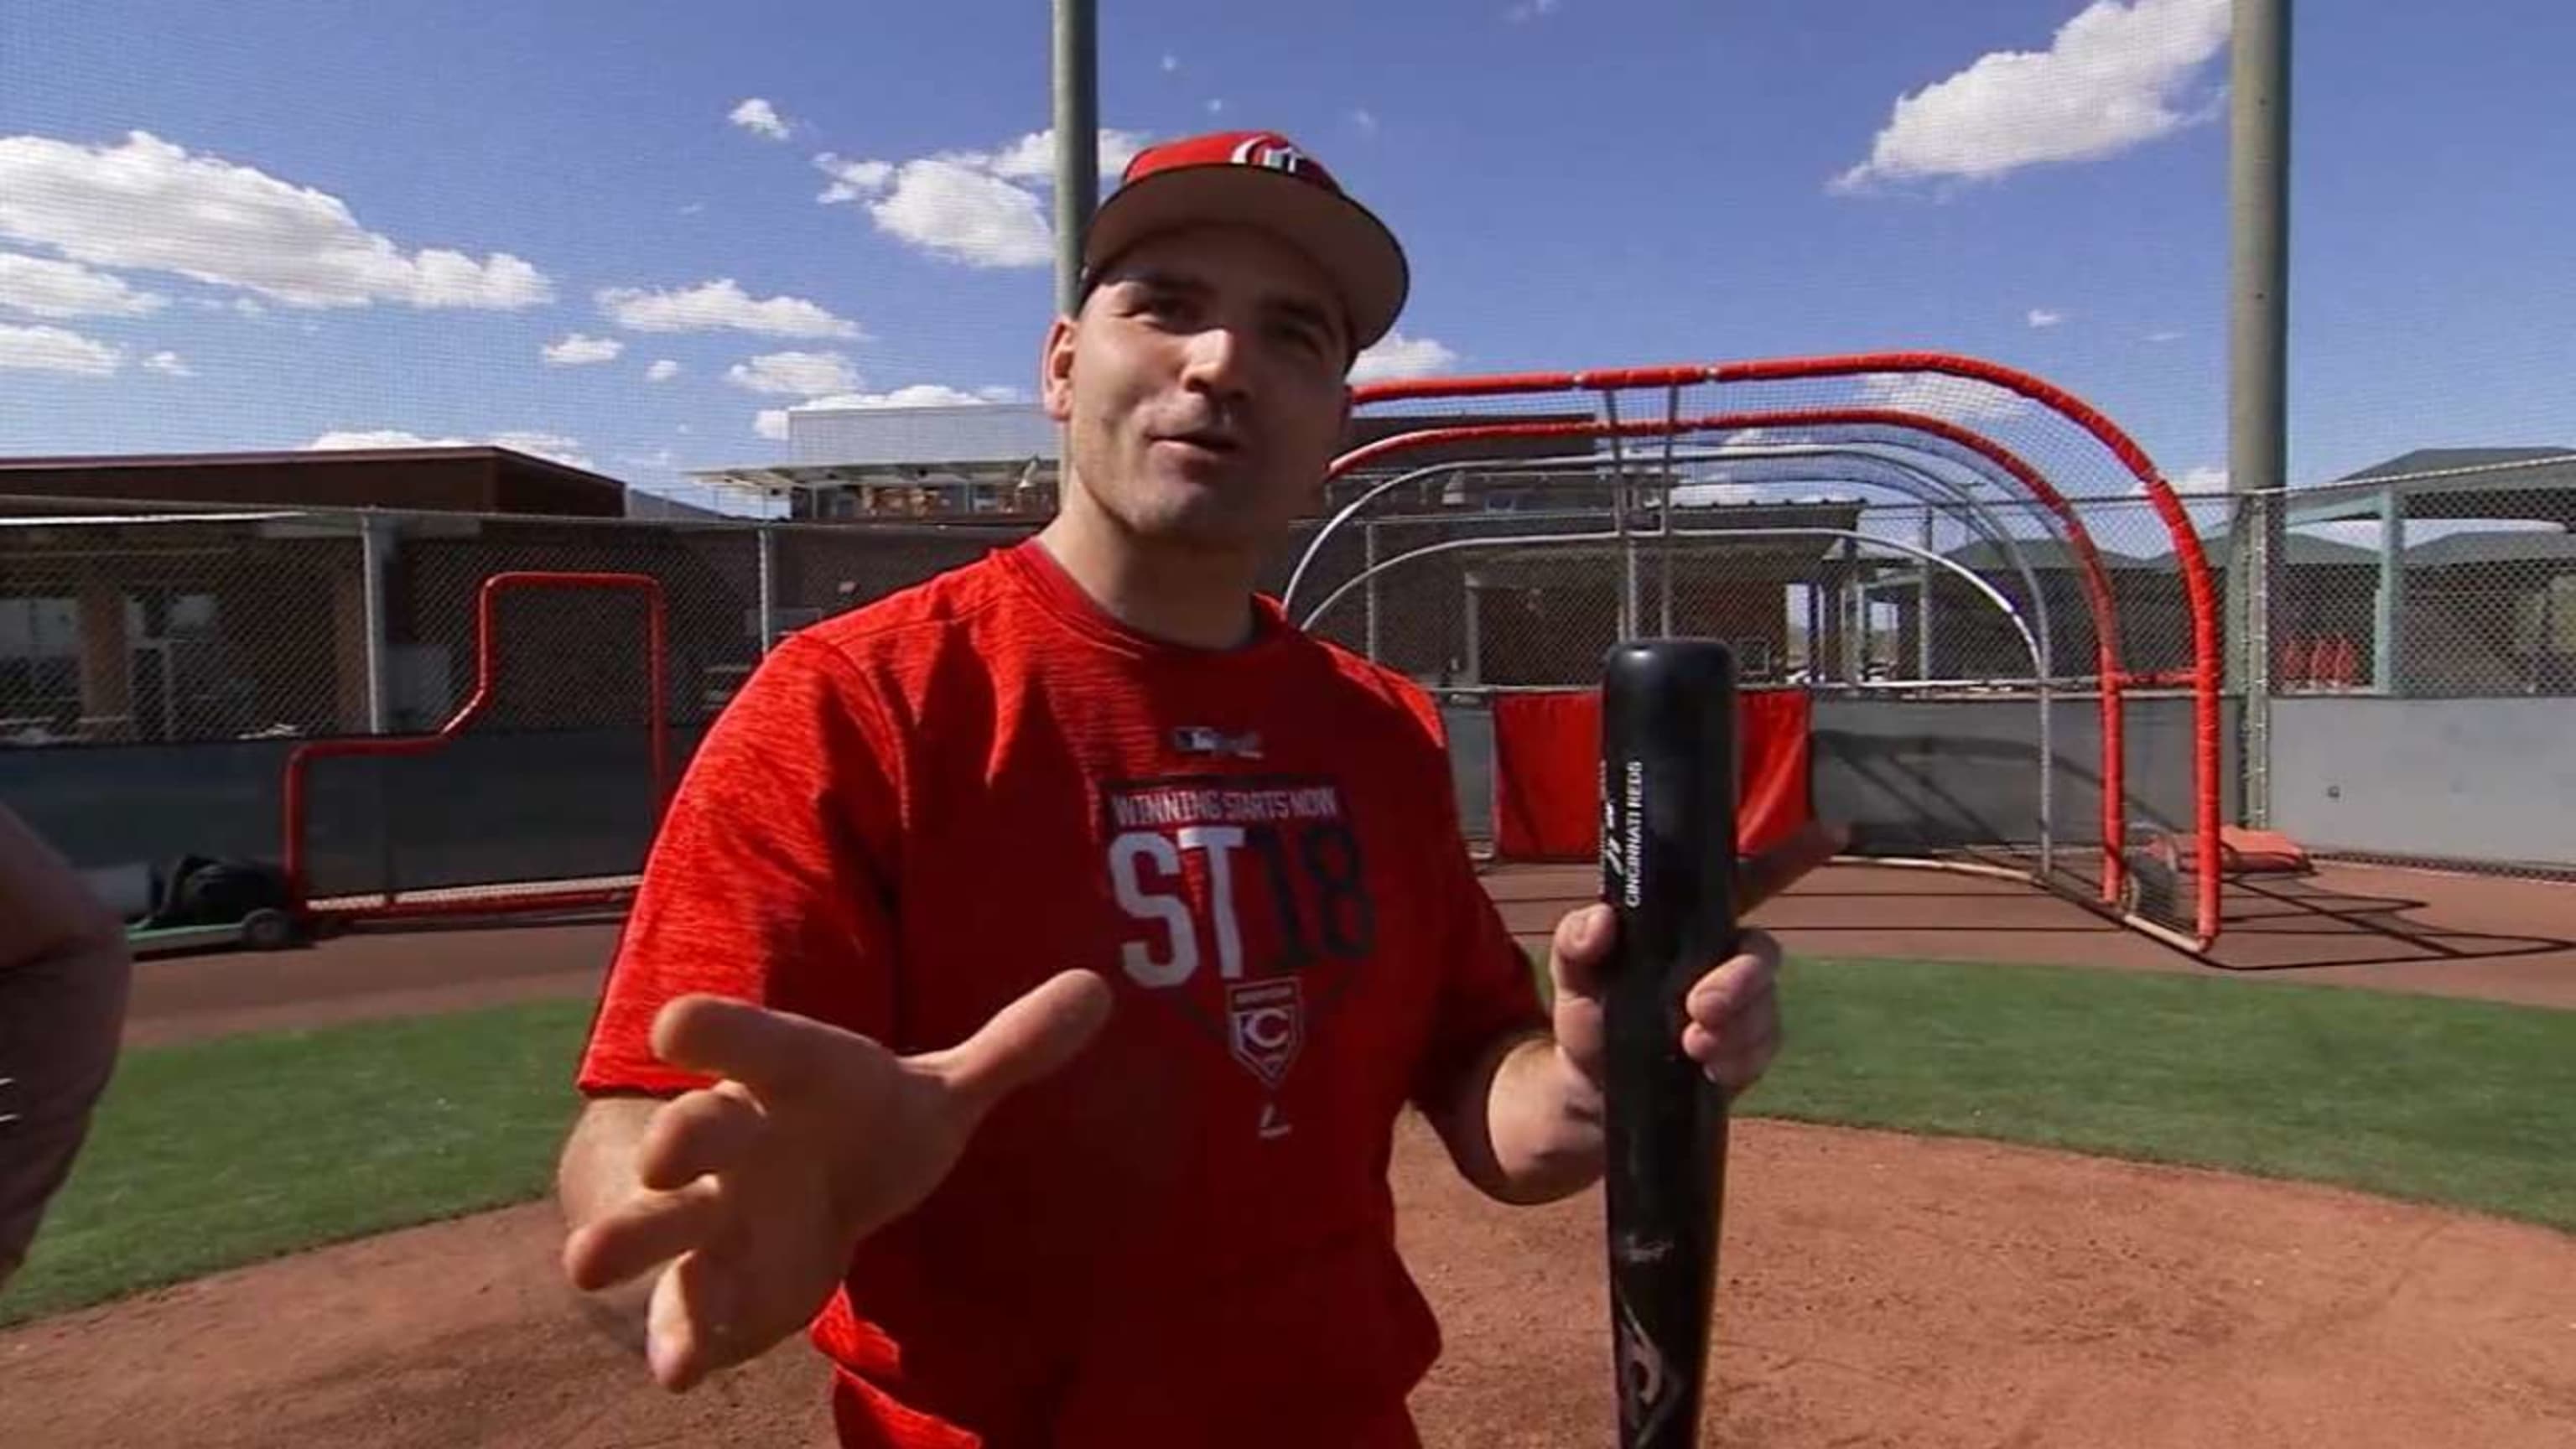 Joey Votto -- 1967 Throwback Jersey (Starting 1B: Went 1-for-3, BB